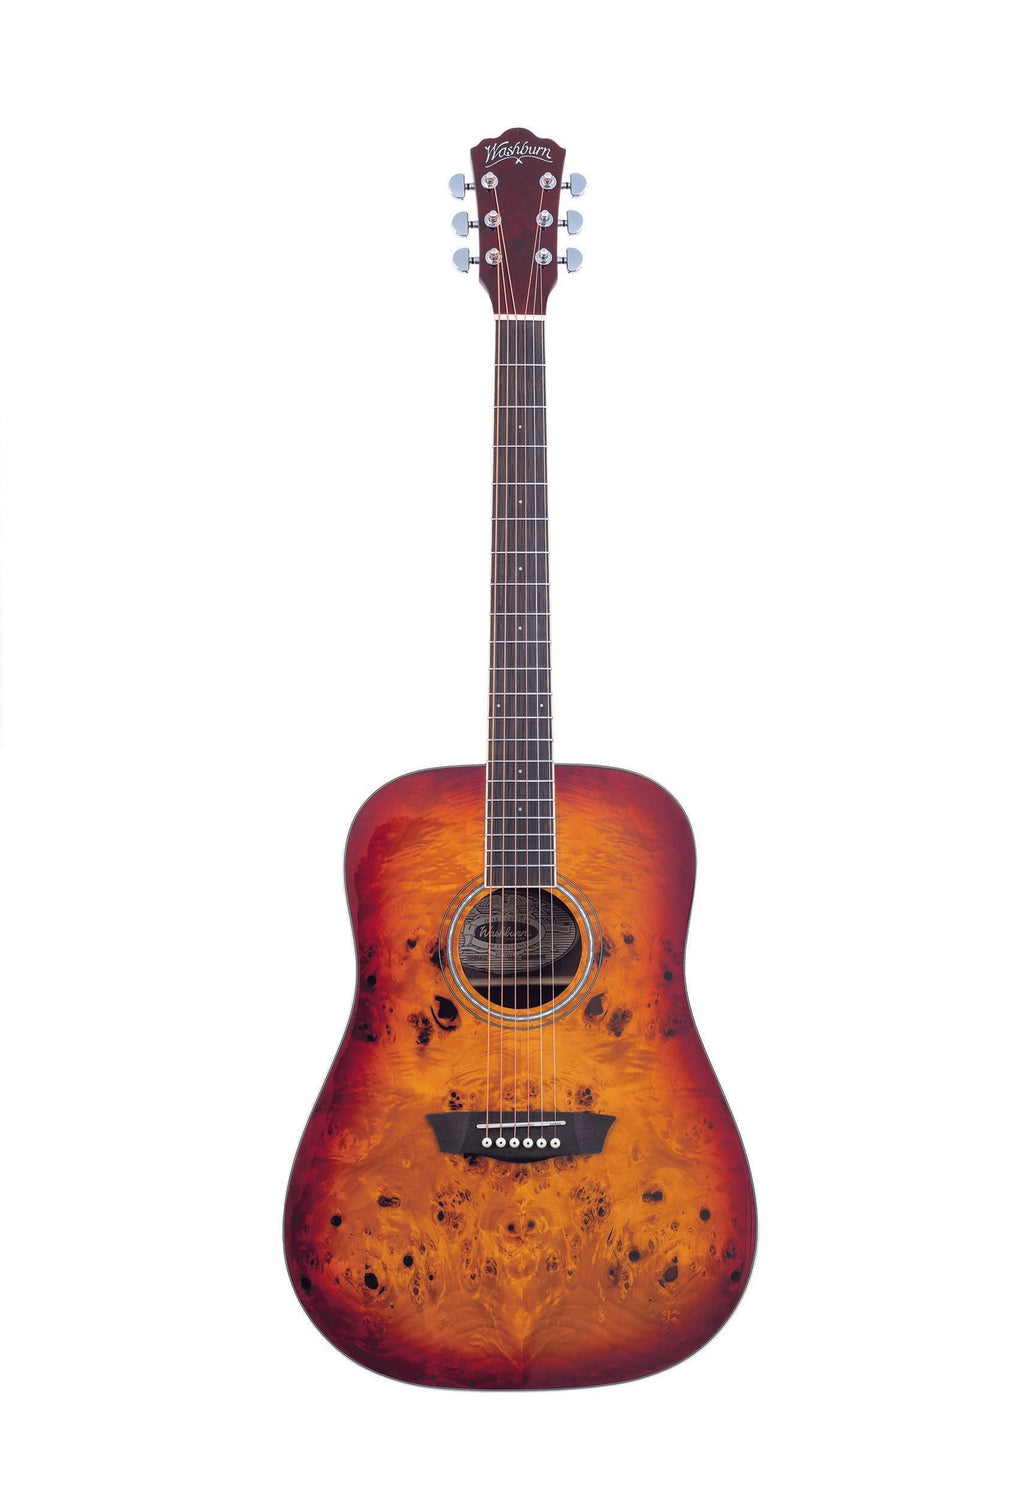 Washburn  Deep Forest Burl Dreadnought Acoustic Guitar in Amber Fade